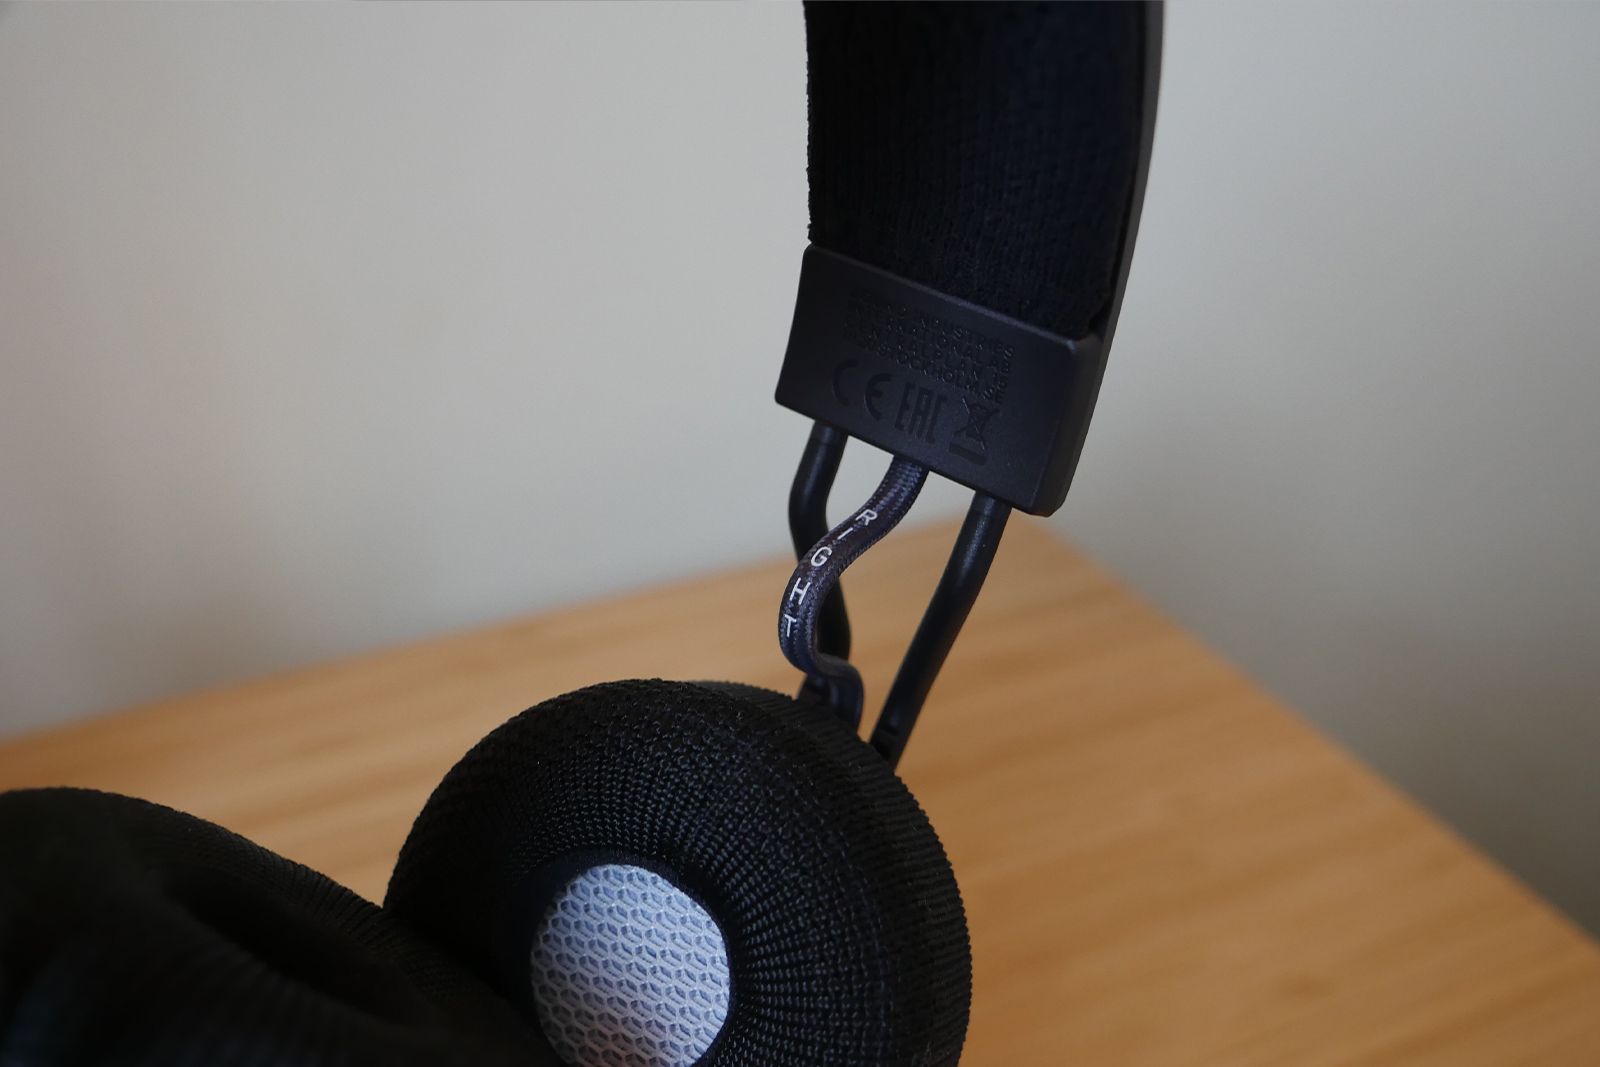 Adidas RPT-02 Sol headphones review: Here comes the sun photo 4